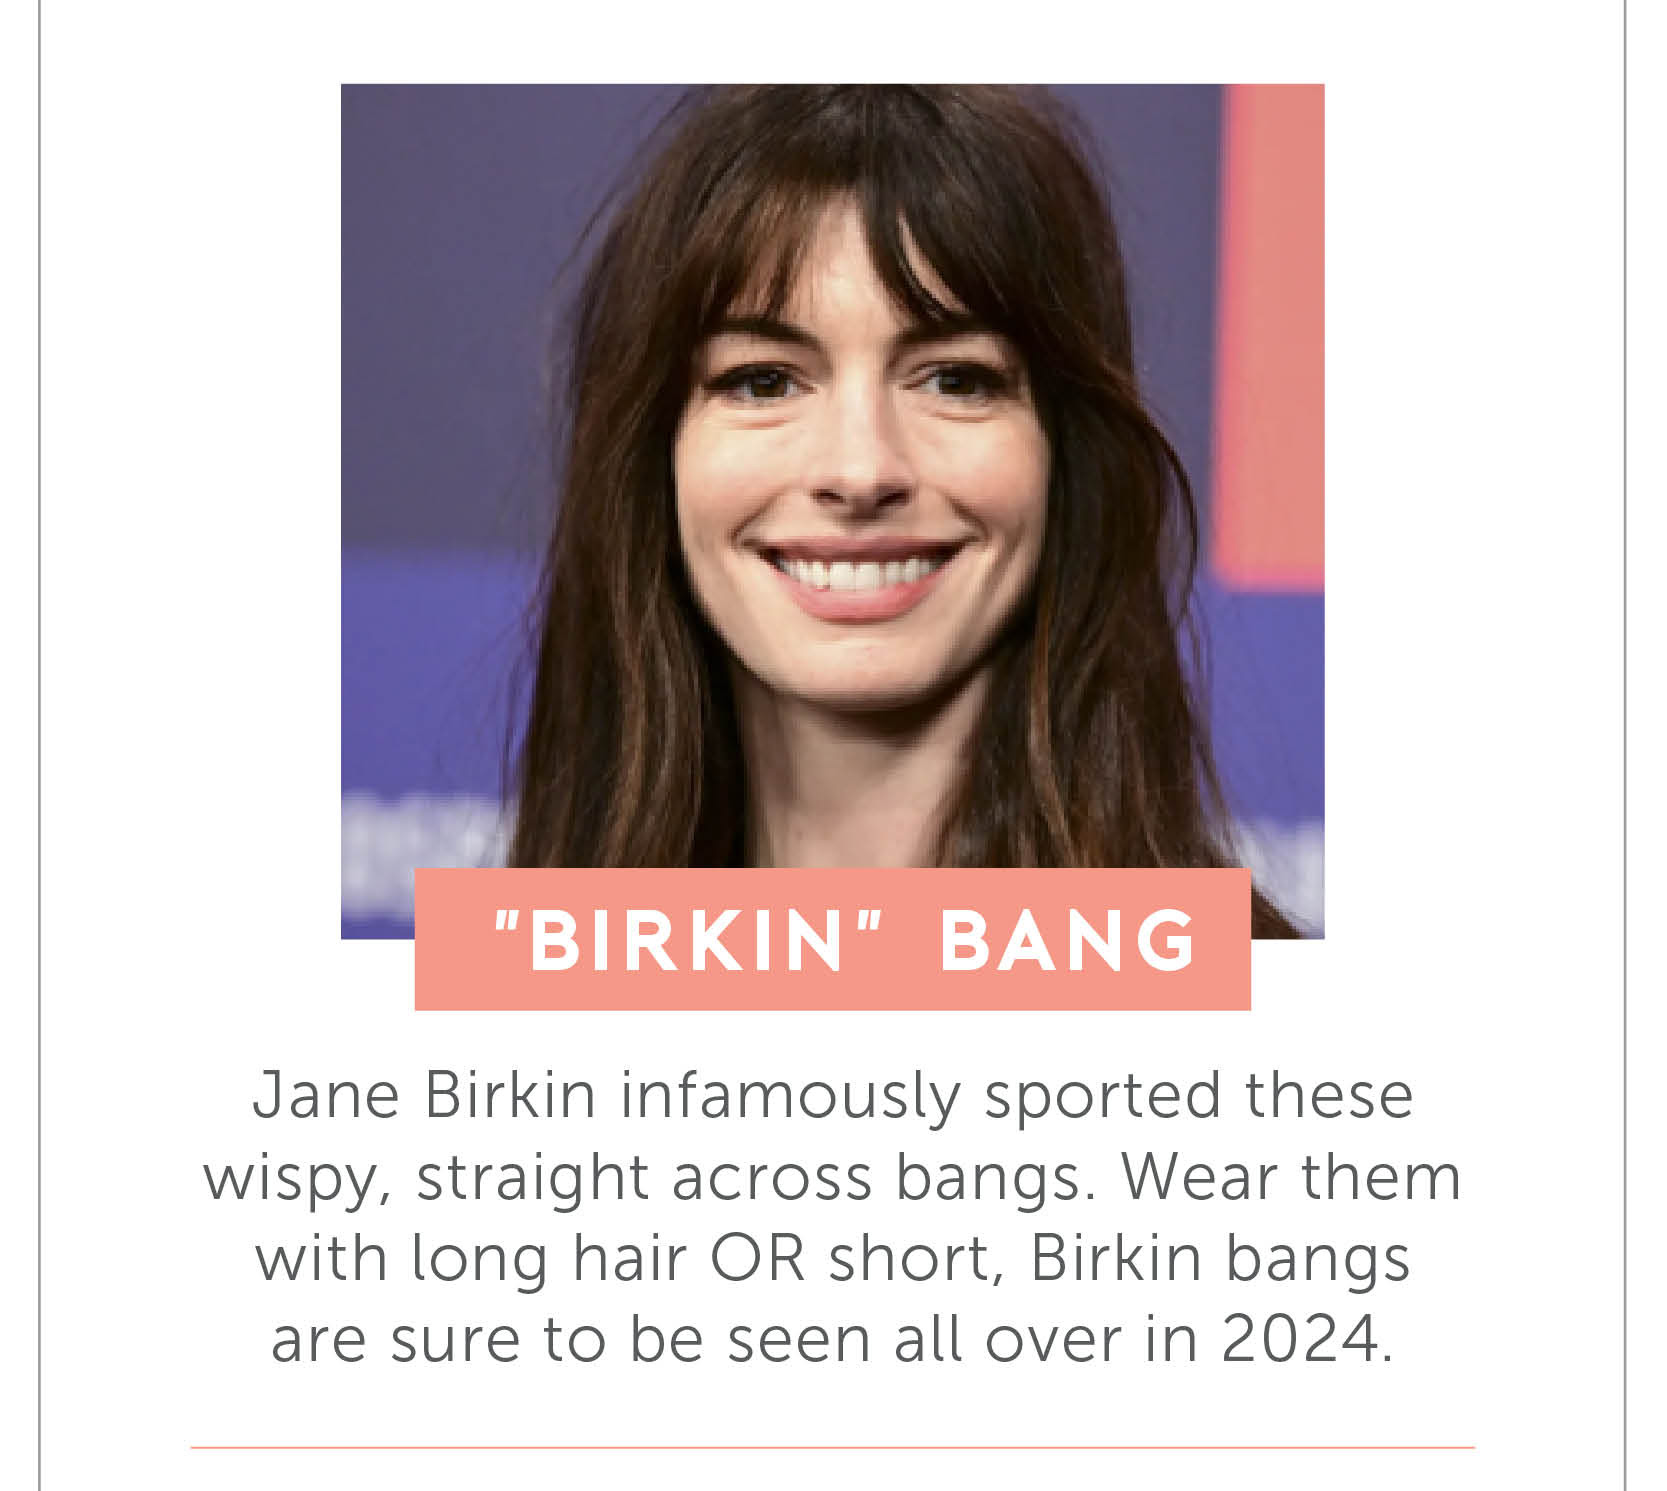 “Birkin” bang- Jane Birkin infamously sported these wispy, straight across bangs. Wear them with long hair OR short,  Birkin bangs are sure to be seen all over in 2024.